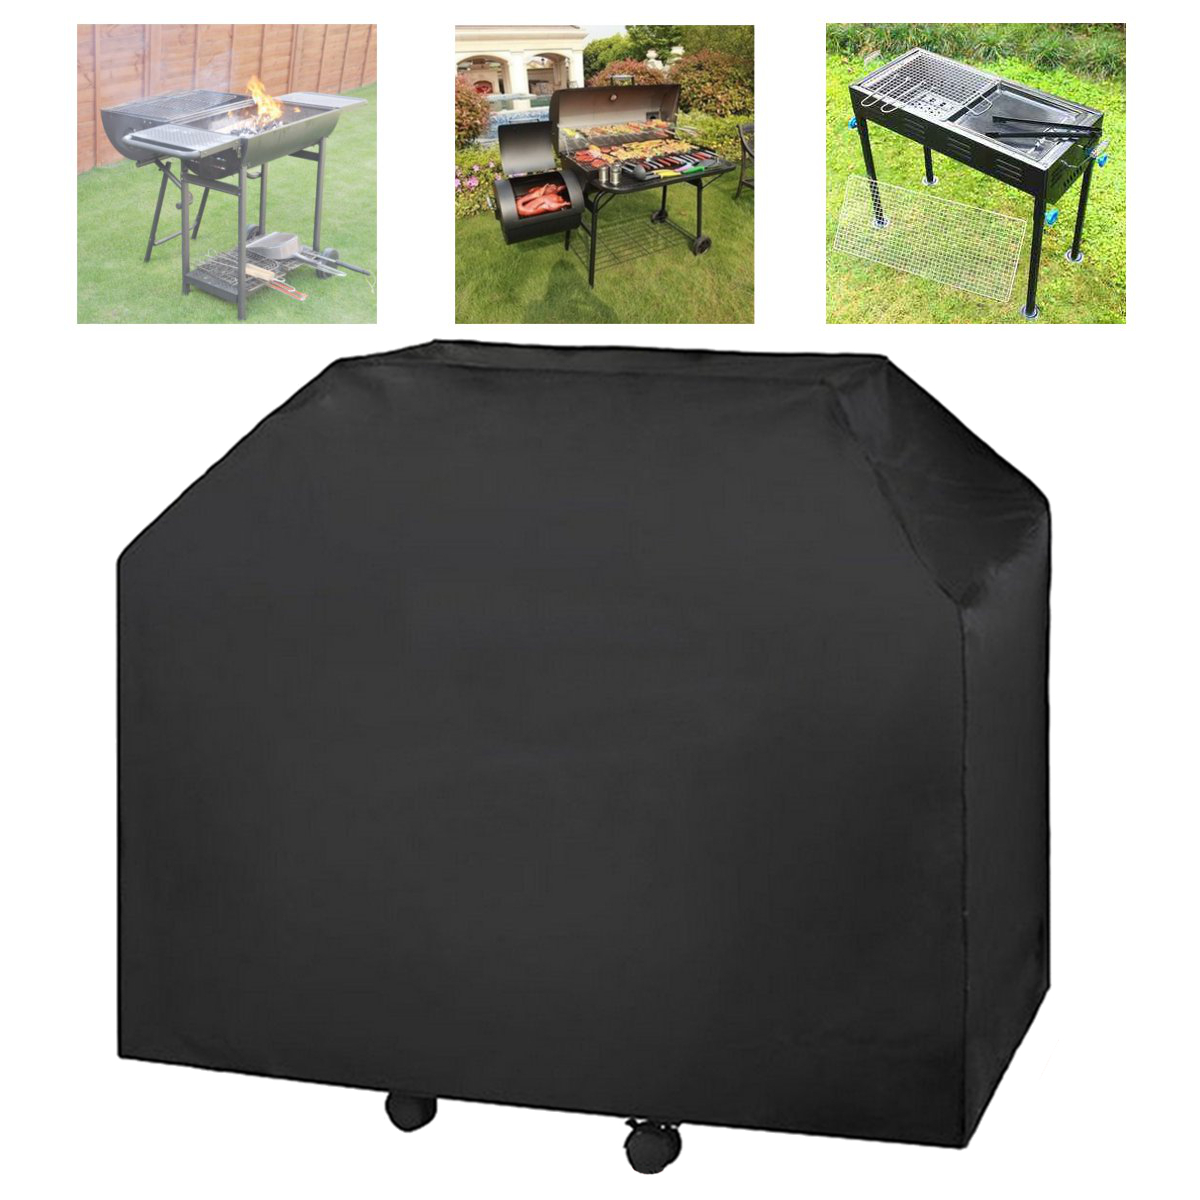 

183x66x130cm Black Heavy Duty BBQ Grill Gas Barbecue Waterproof Cover Outdoor Rain Protector